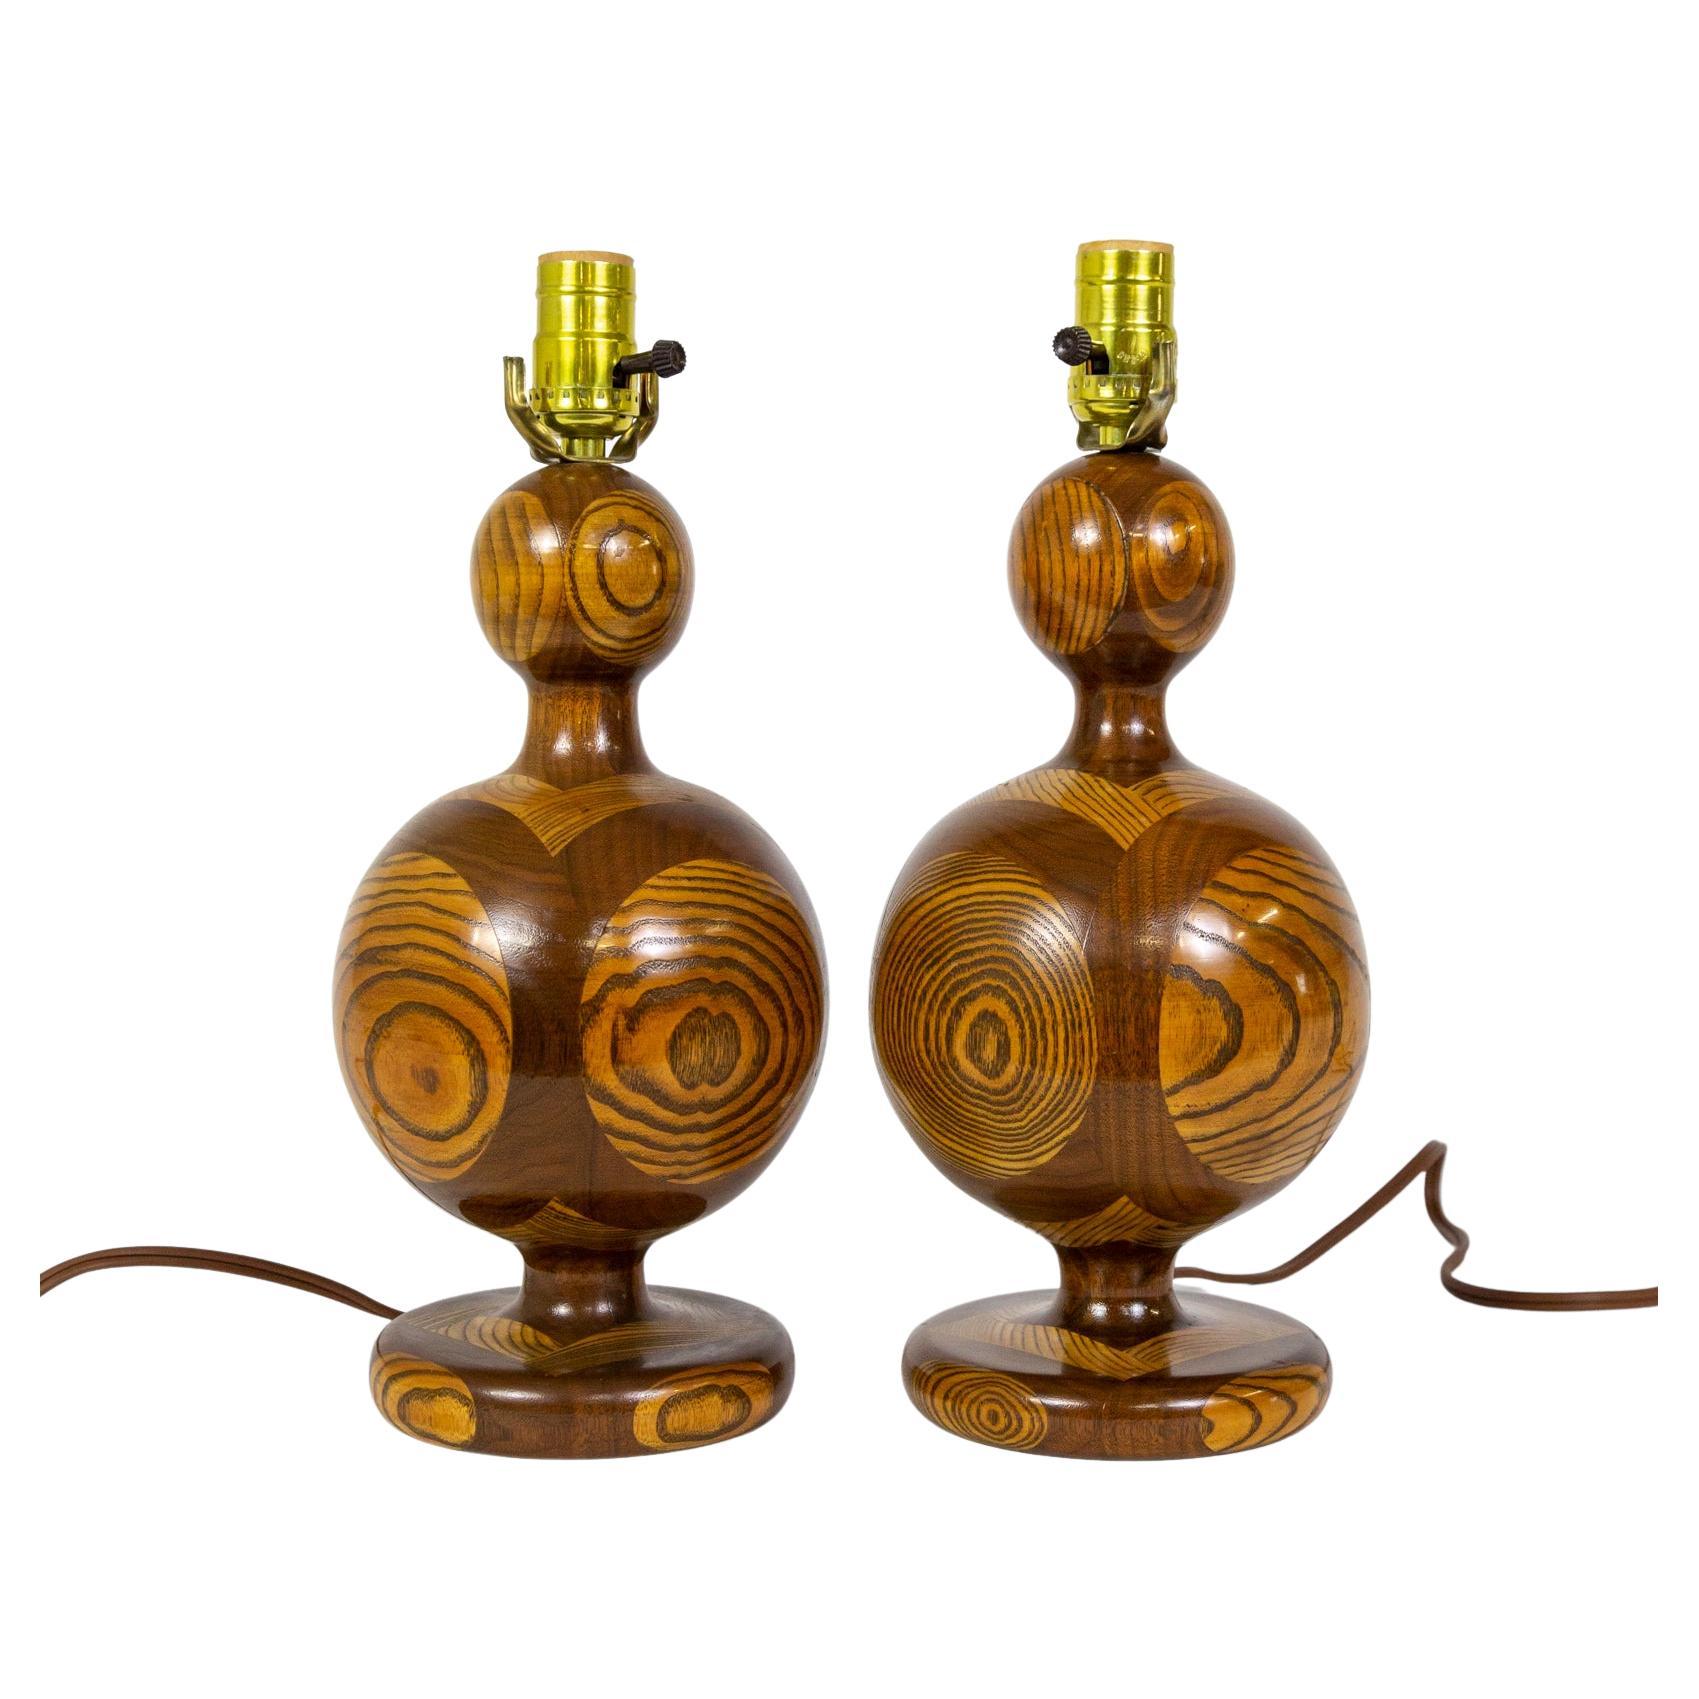 Segmented 'Inlaid-Esque' Turned Walnut/Cherry Wood Lamps, Pair